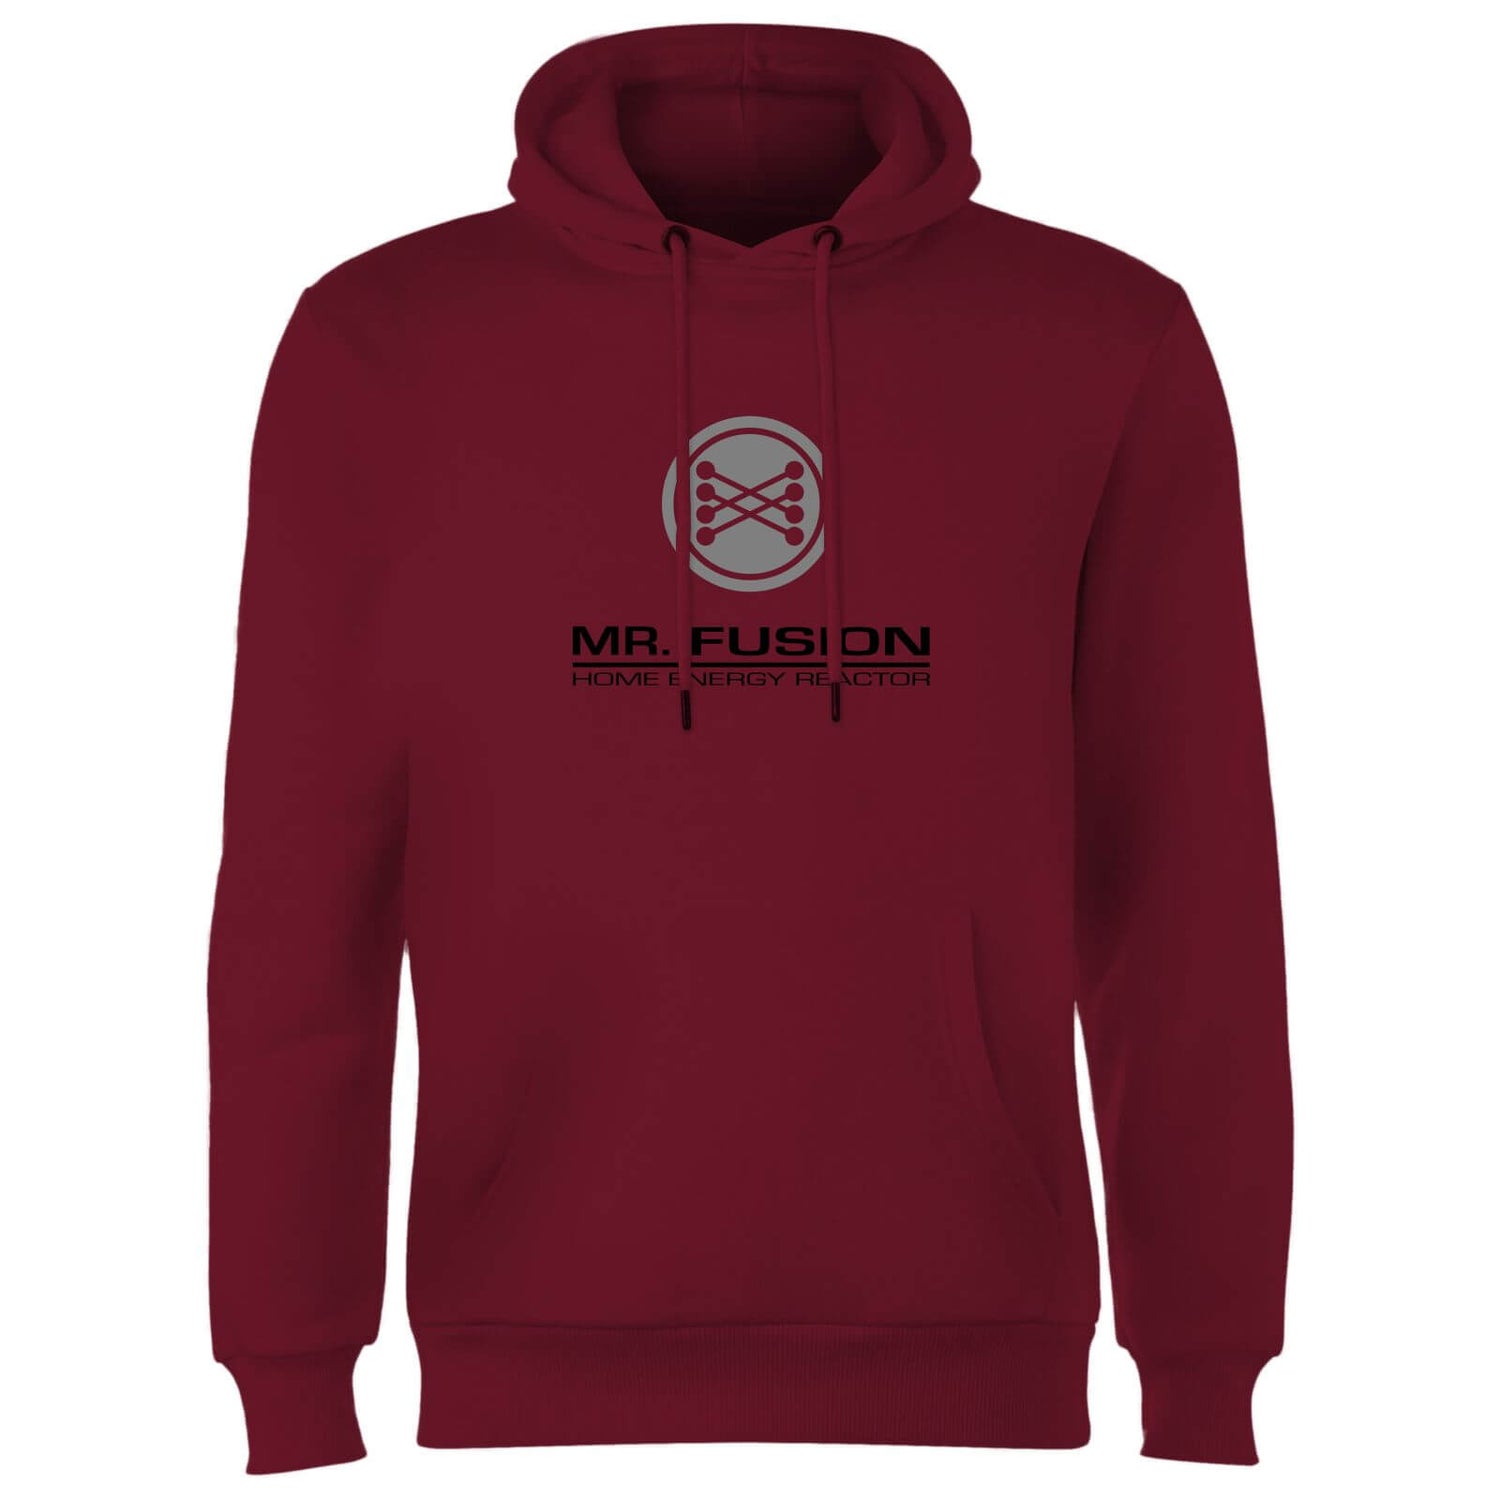 Back To The Future Mr Fusion Hoodie - Burgundy